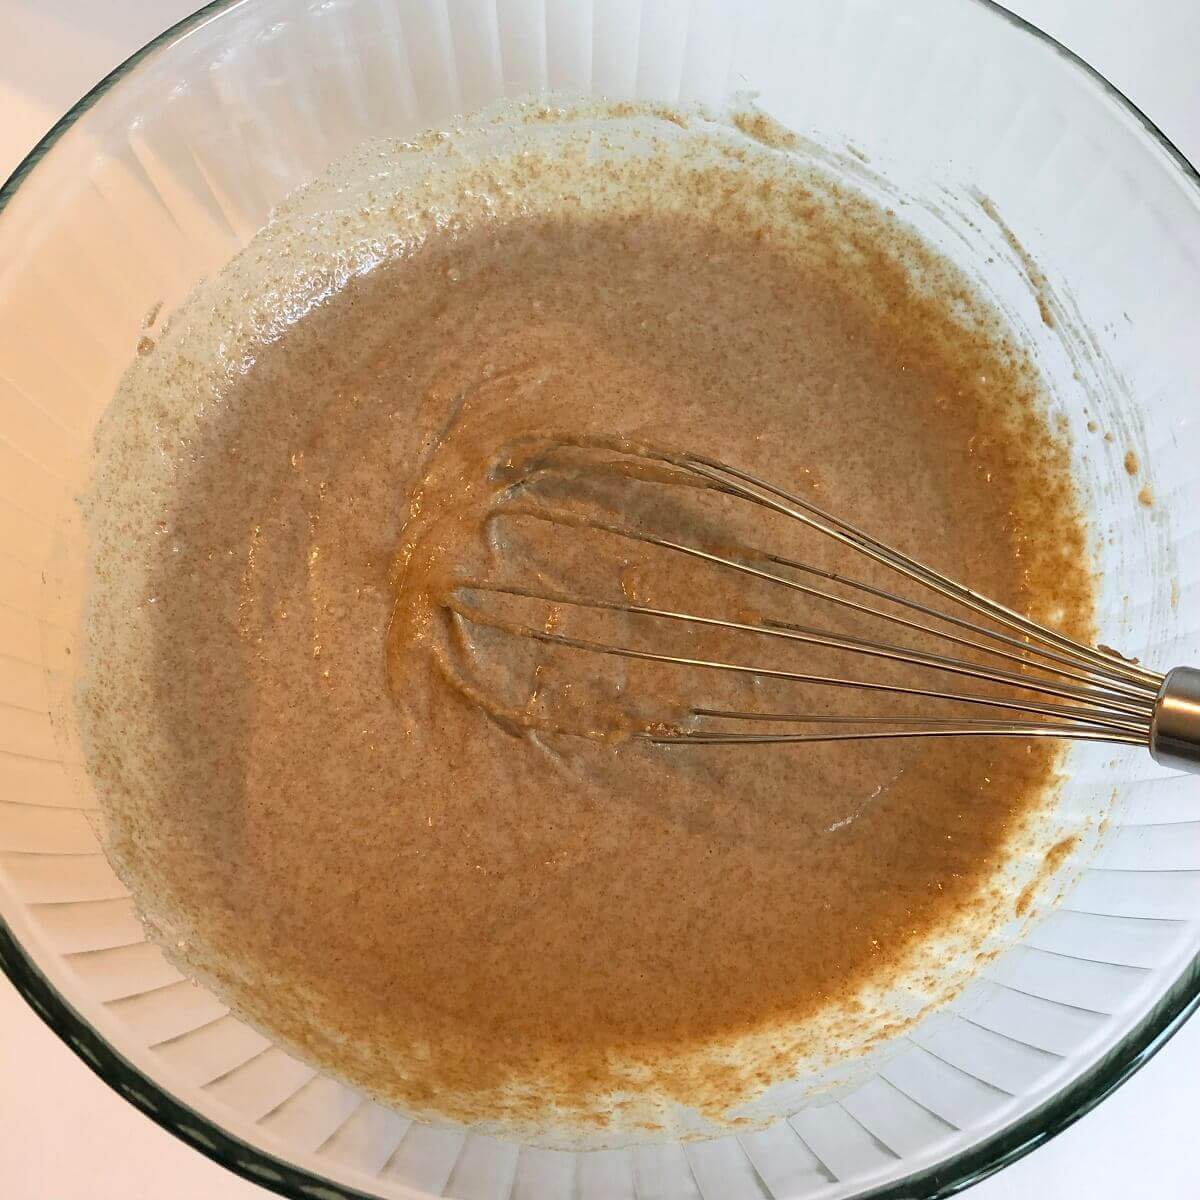 Spelt batter in a glass bowl with a whisk.